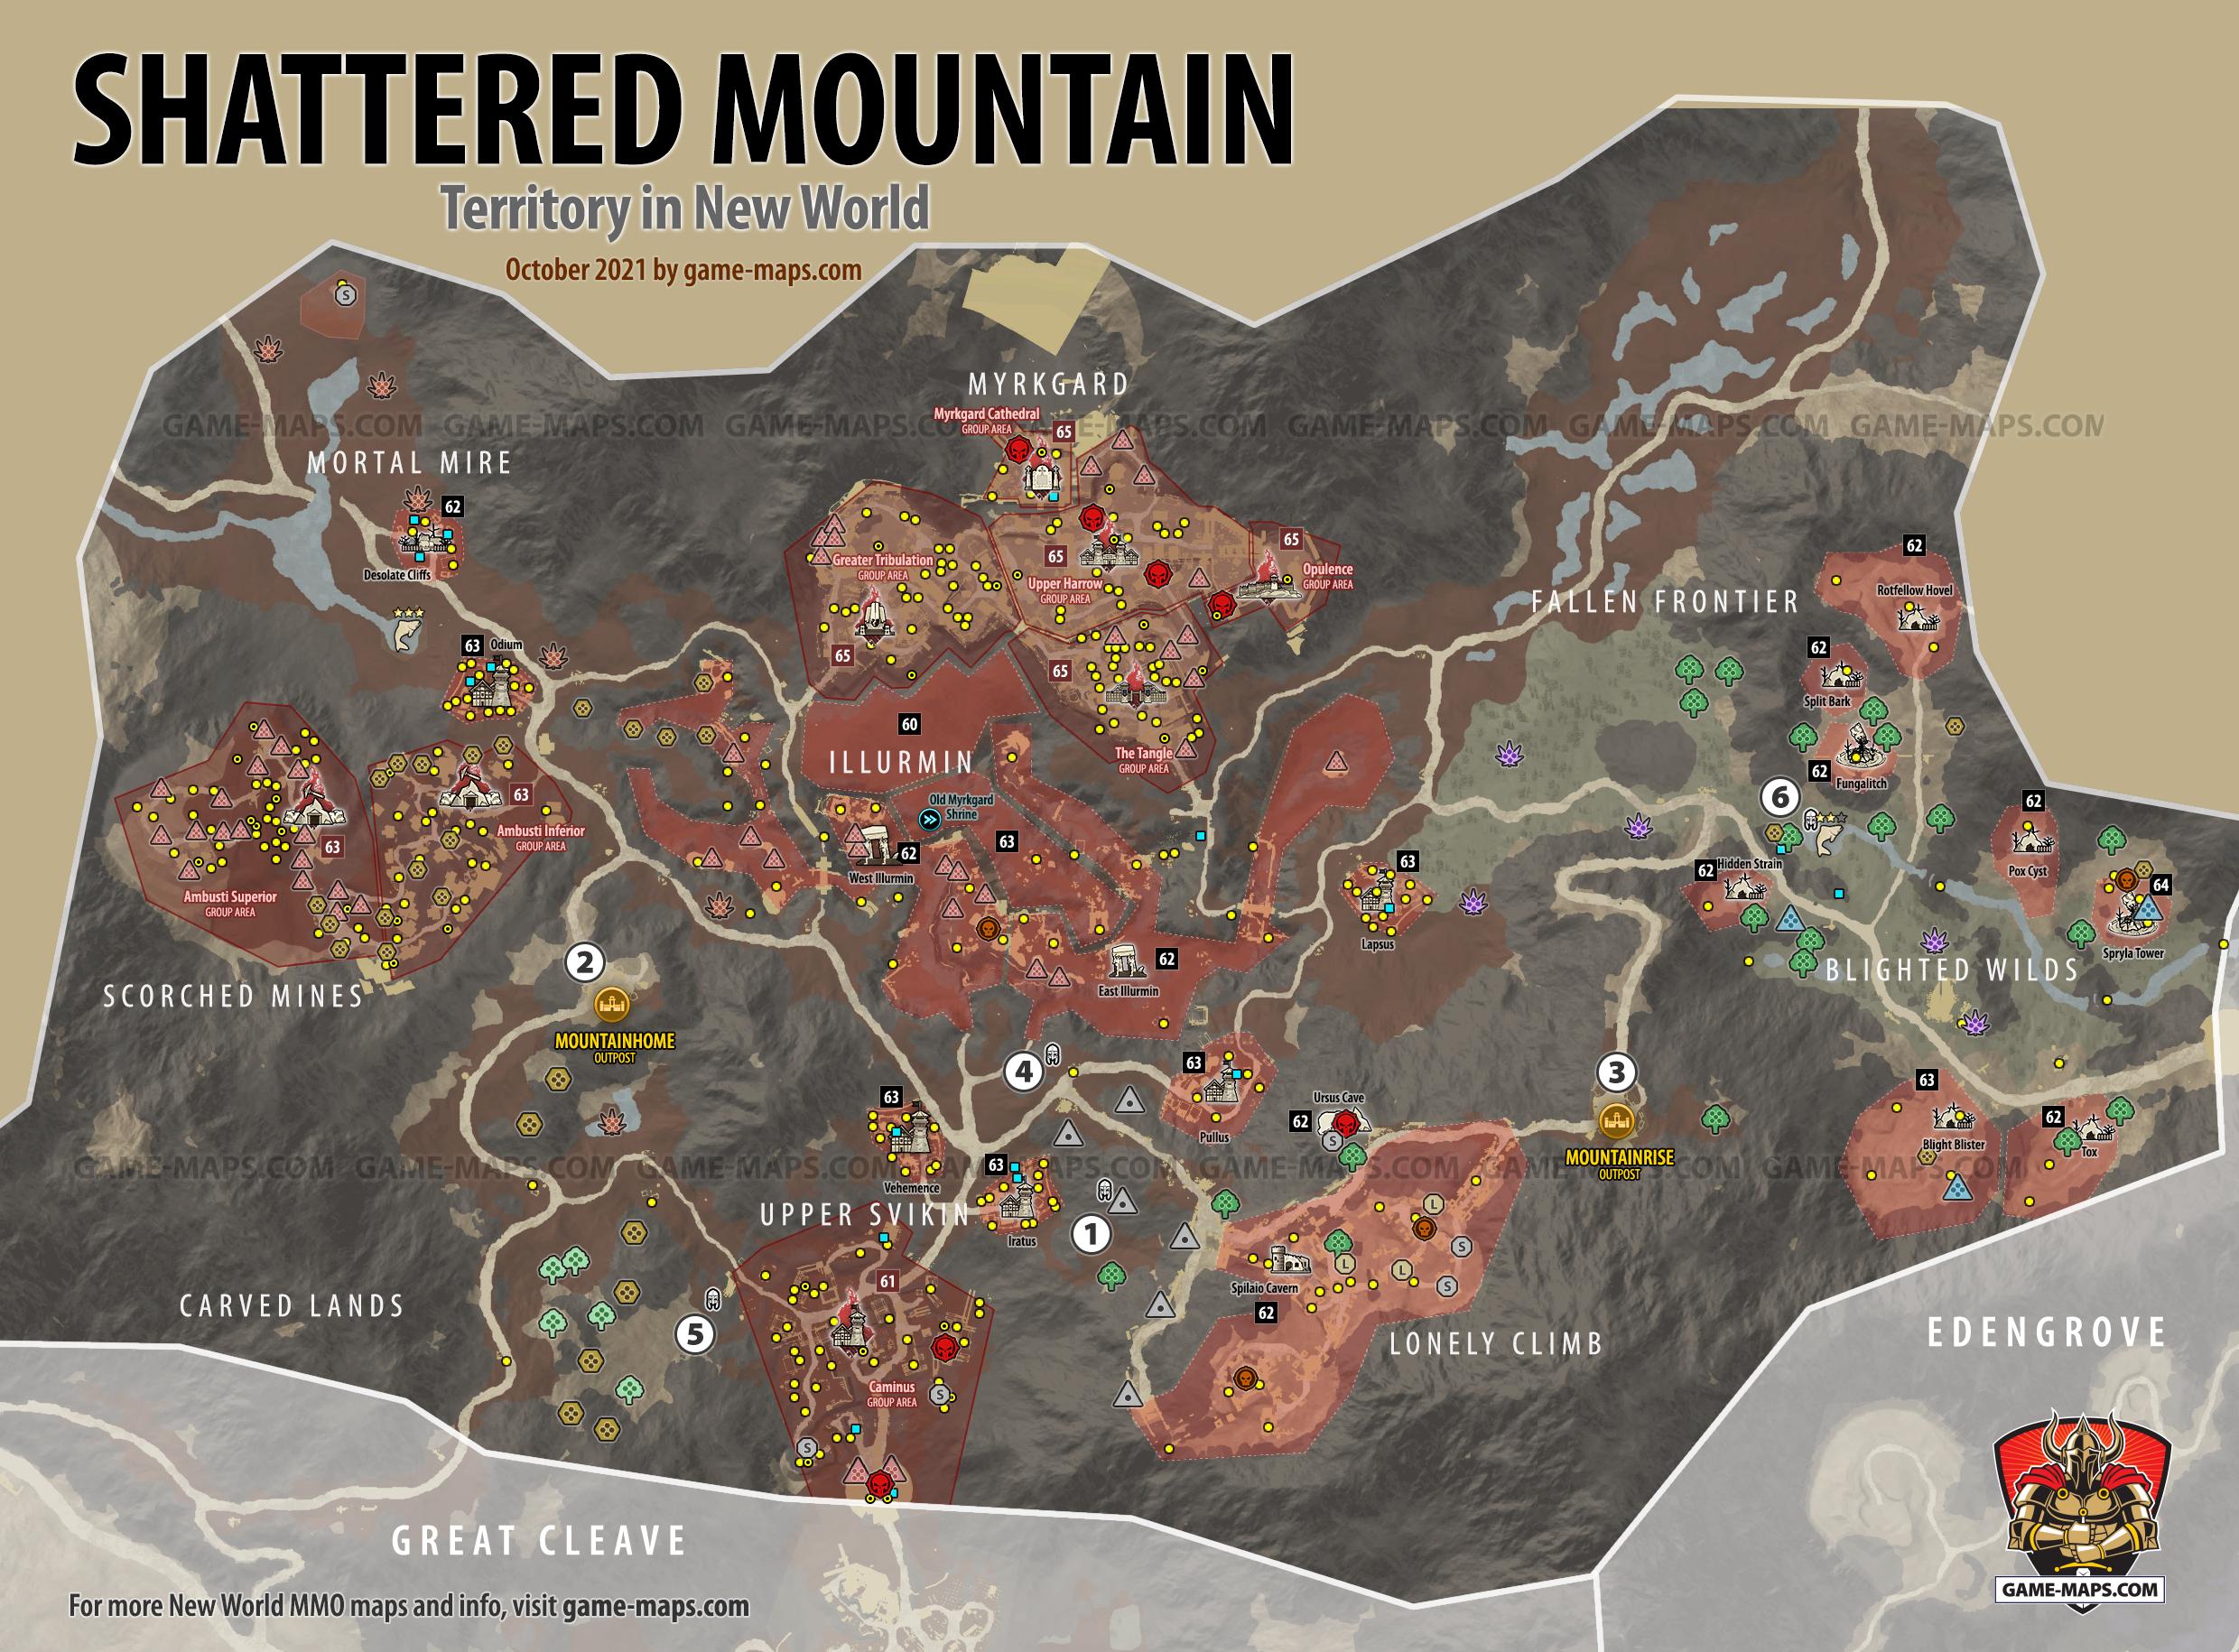 New World Map Shattered Mountain Territory